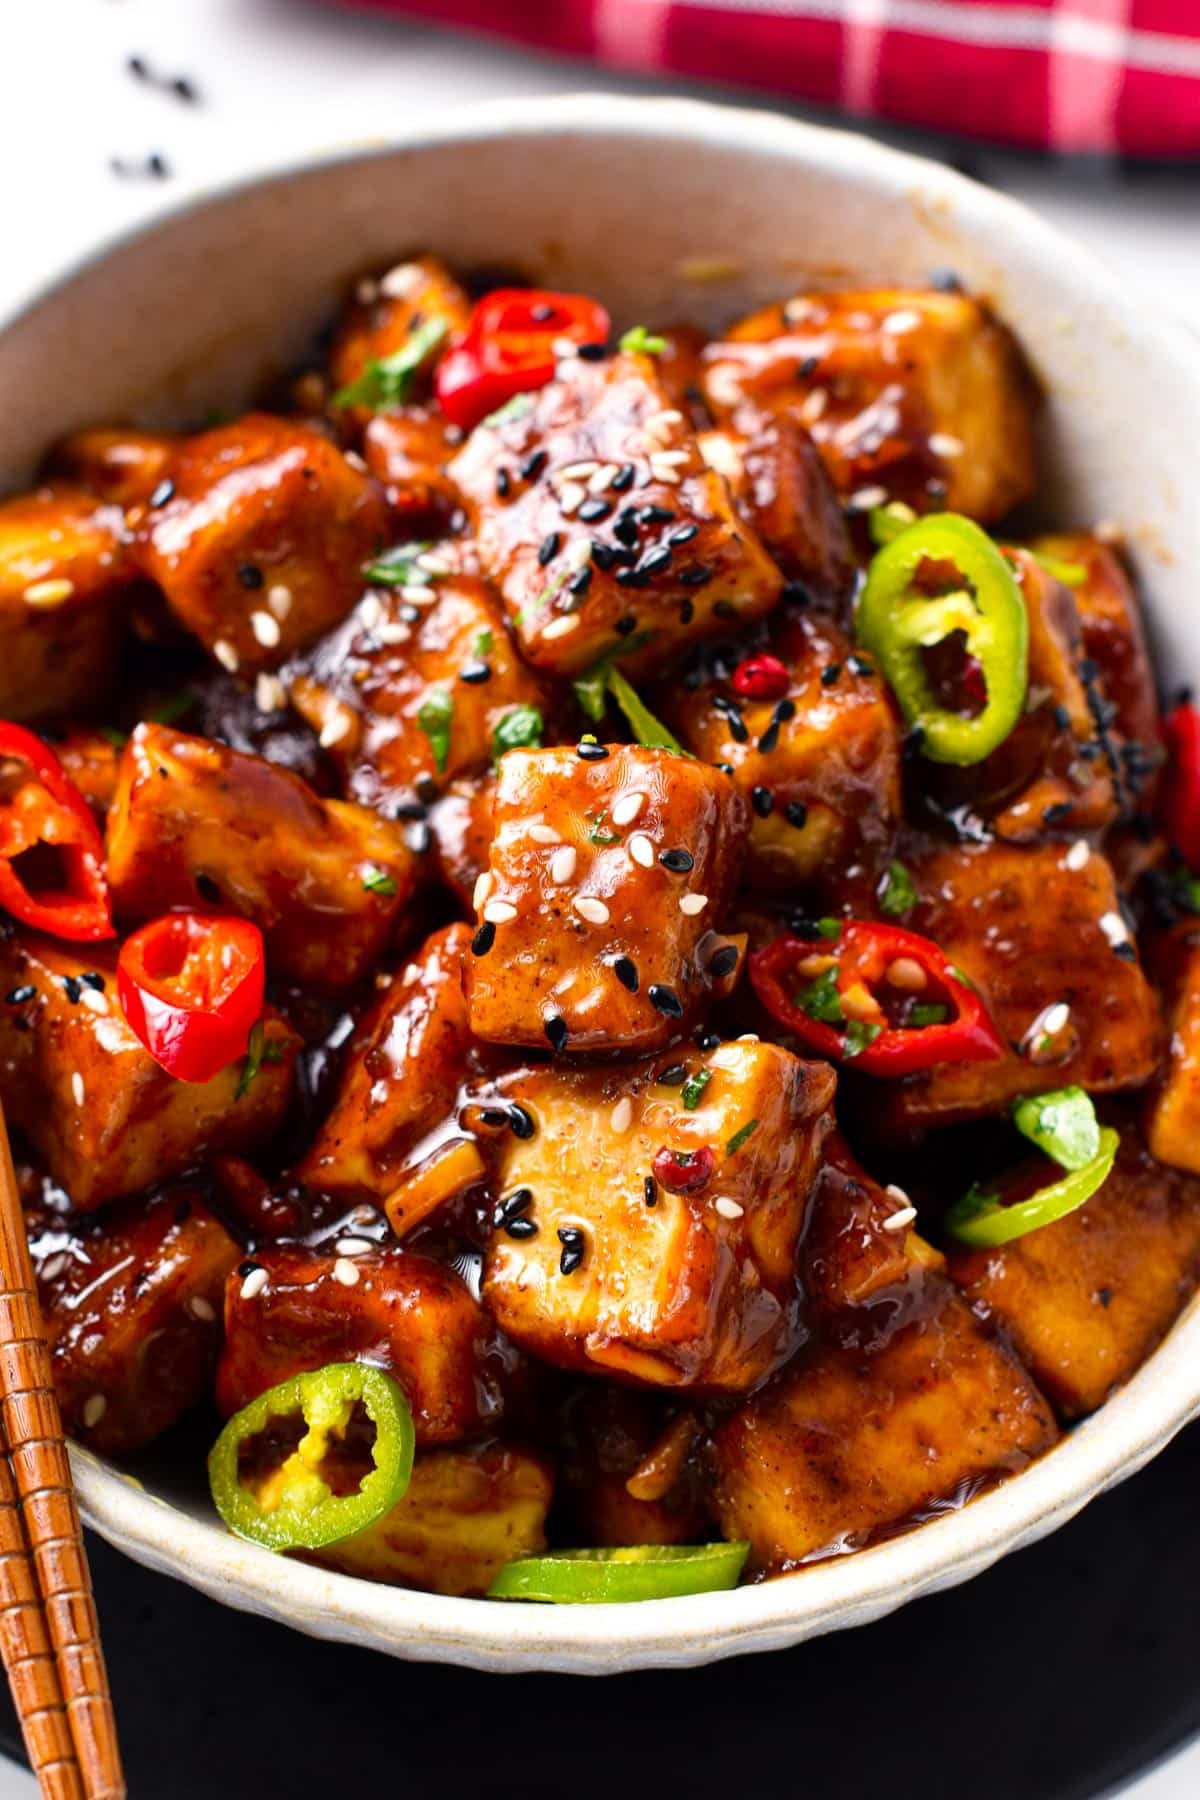 This Szechuan Tofu will fix your spicy Chinese food craving! Delicious crispy tofu pieces coated with a spicy Sichuan sauce packed with garlic, chili pepper, and Schezuan pepper.